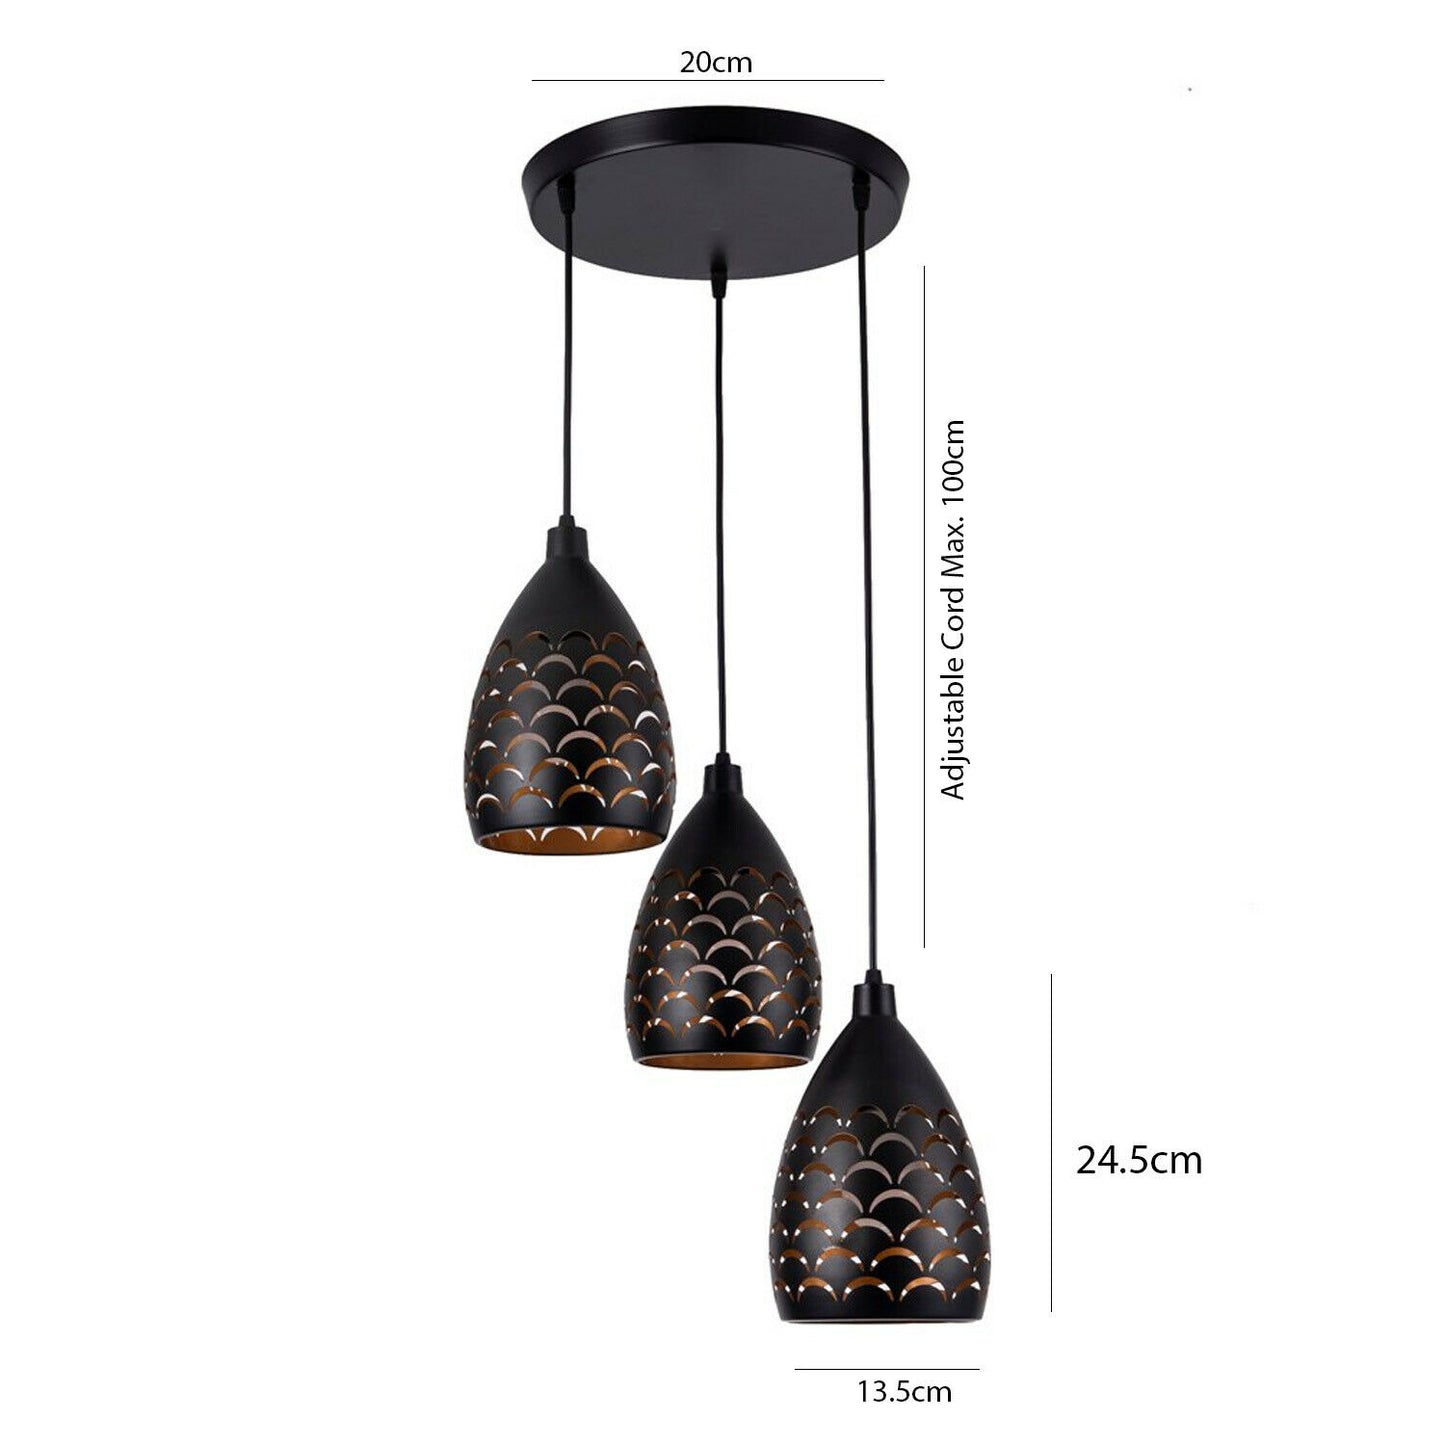 Modern 3 Way Pendant Cluster Light Fitting Black Cage Style -Size Image